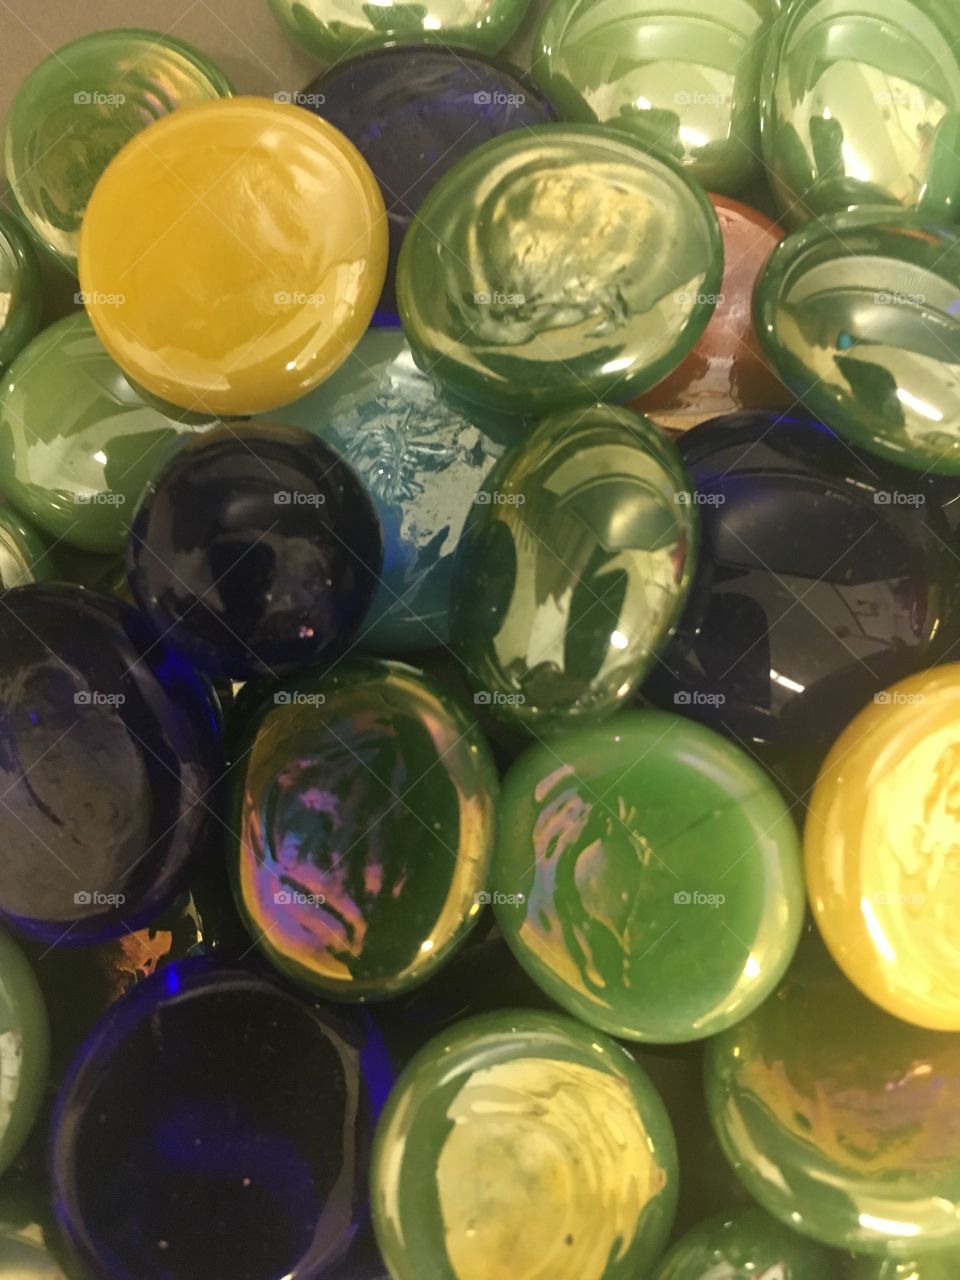 Glass Beads-A close up view of round glass beads in greens, yellows, and blues.  the beads are shiny, bright, and circles.